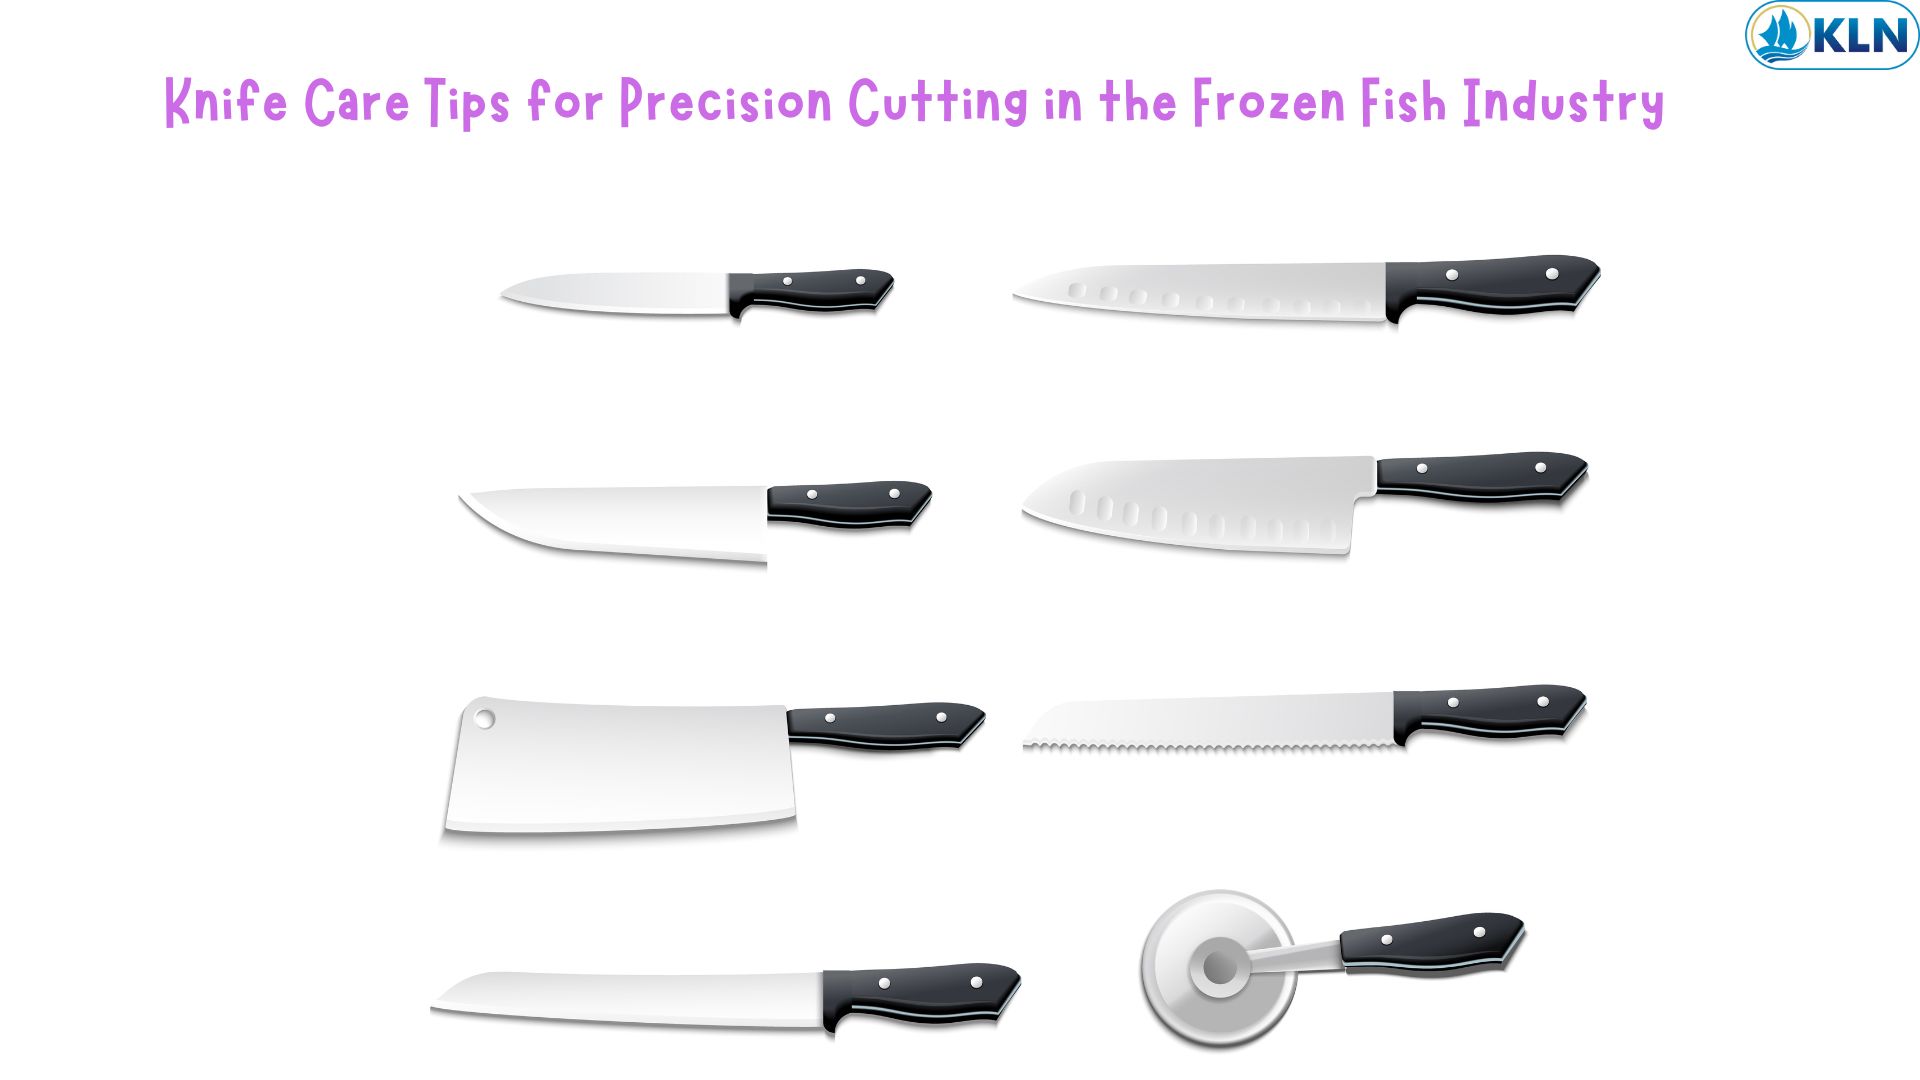 Knife Care Tips for Precision Cutting in the Frozen Fish Industry